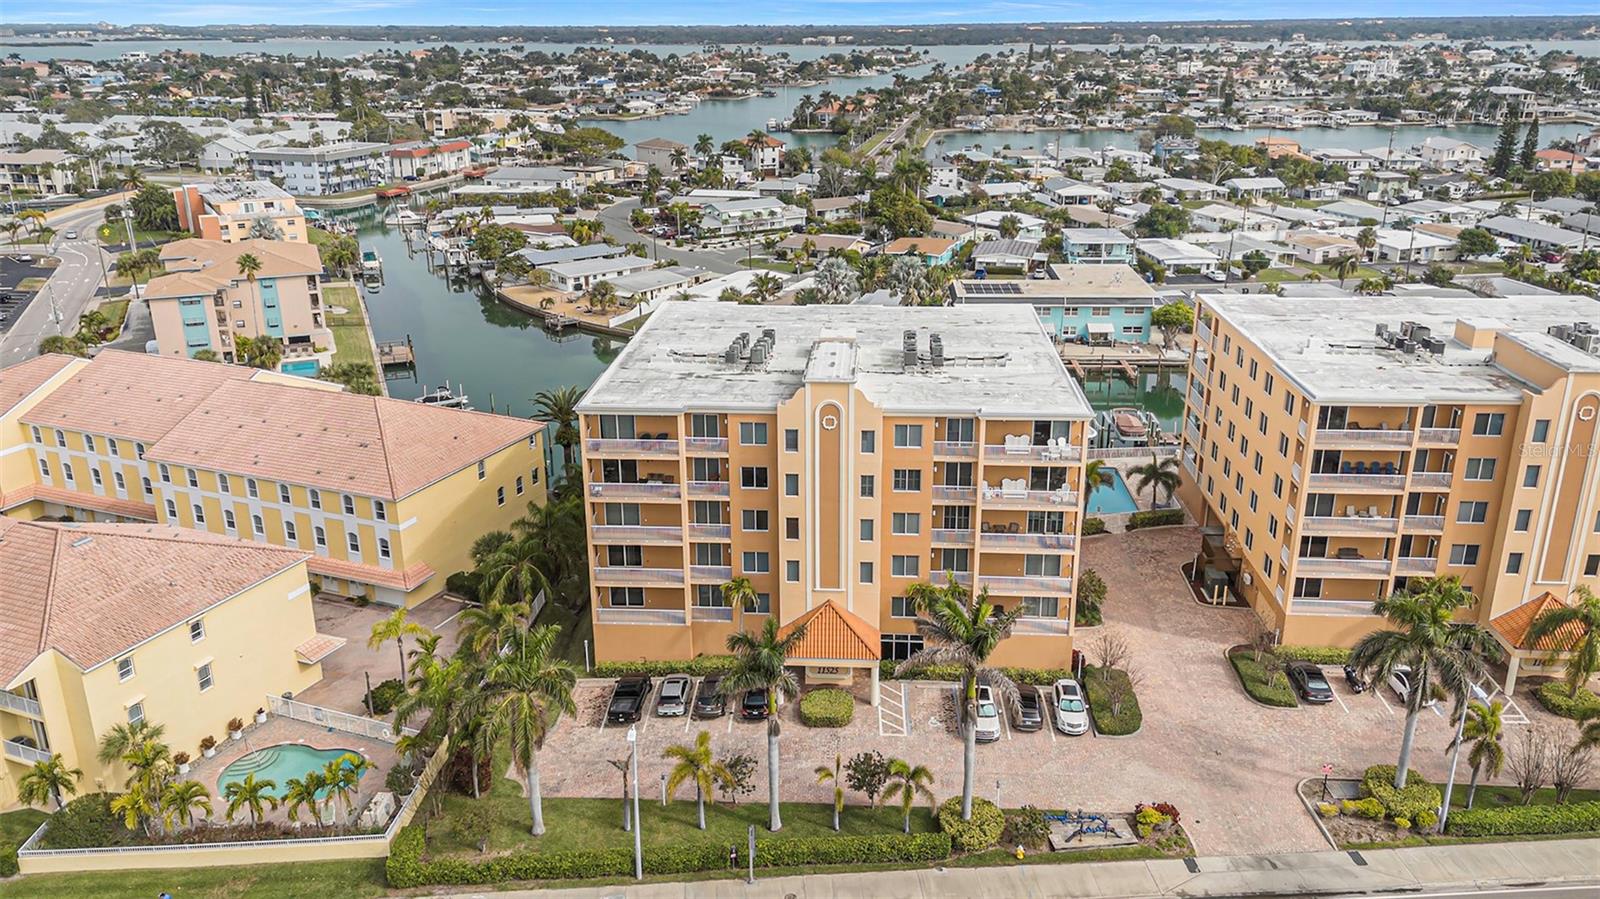 If you're looking for a condo with Florida views...this has it!  Gulf of Mexico, intracoastal, Boca Ciega Bay, saltwater canal, and the beautiful Florida skies above!